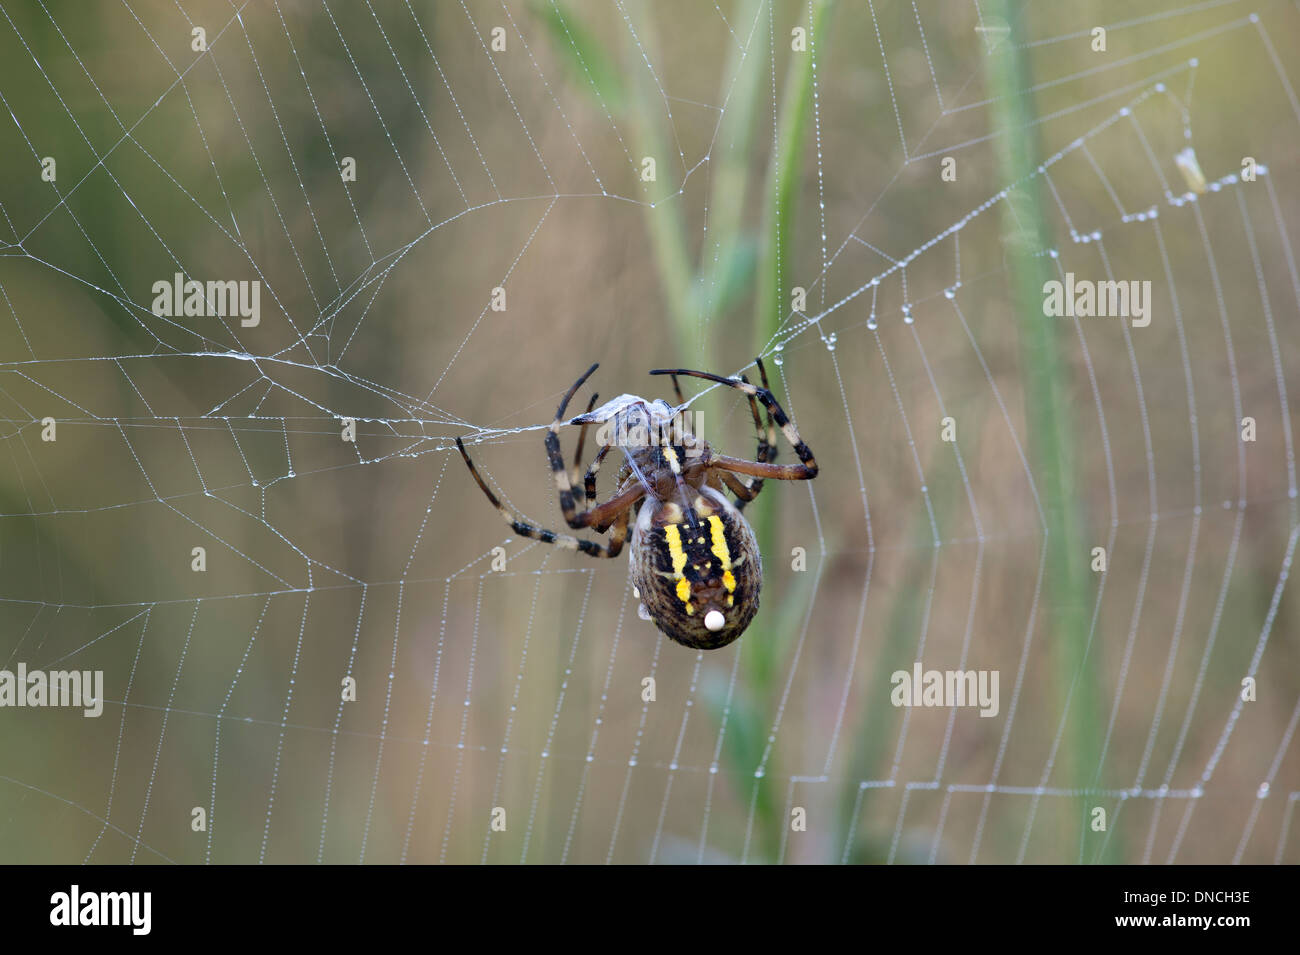 Wasp spider (Argiope bruennichi) wrapping up its prey in silk, Typical orb-weaver spiders (Araneidae) Stock Photo